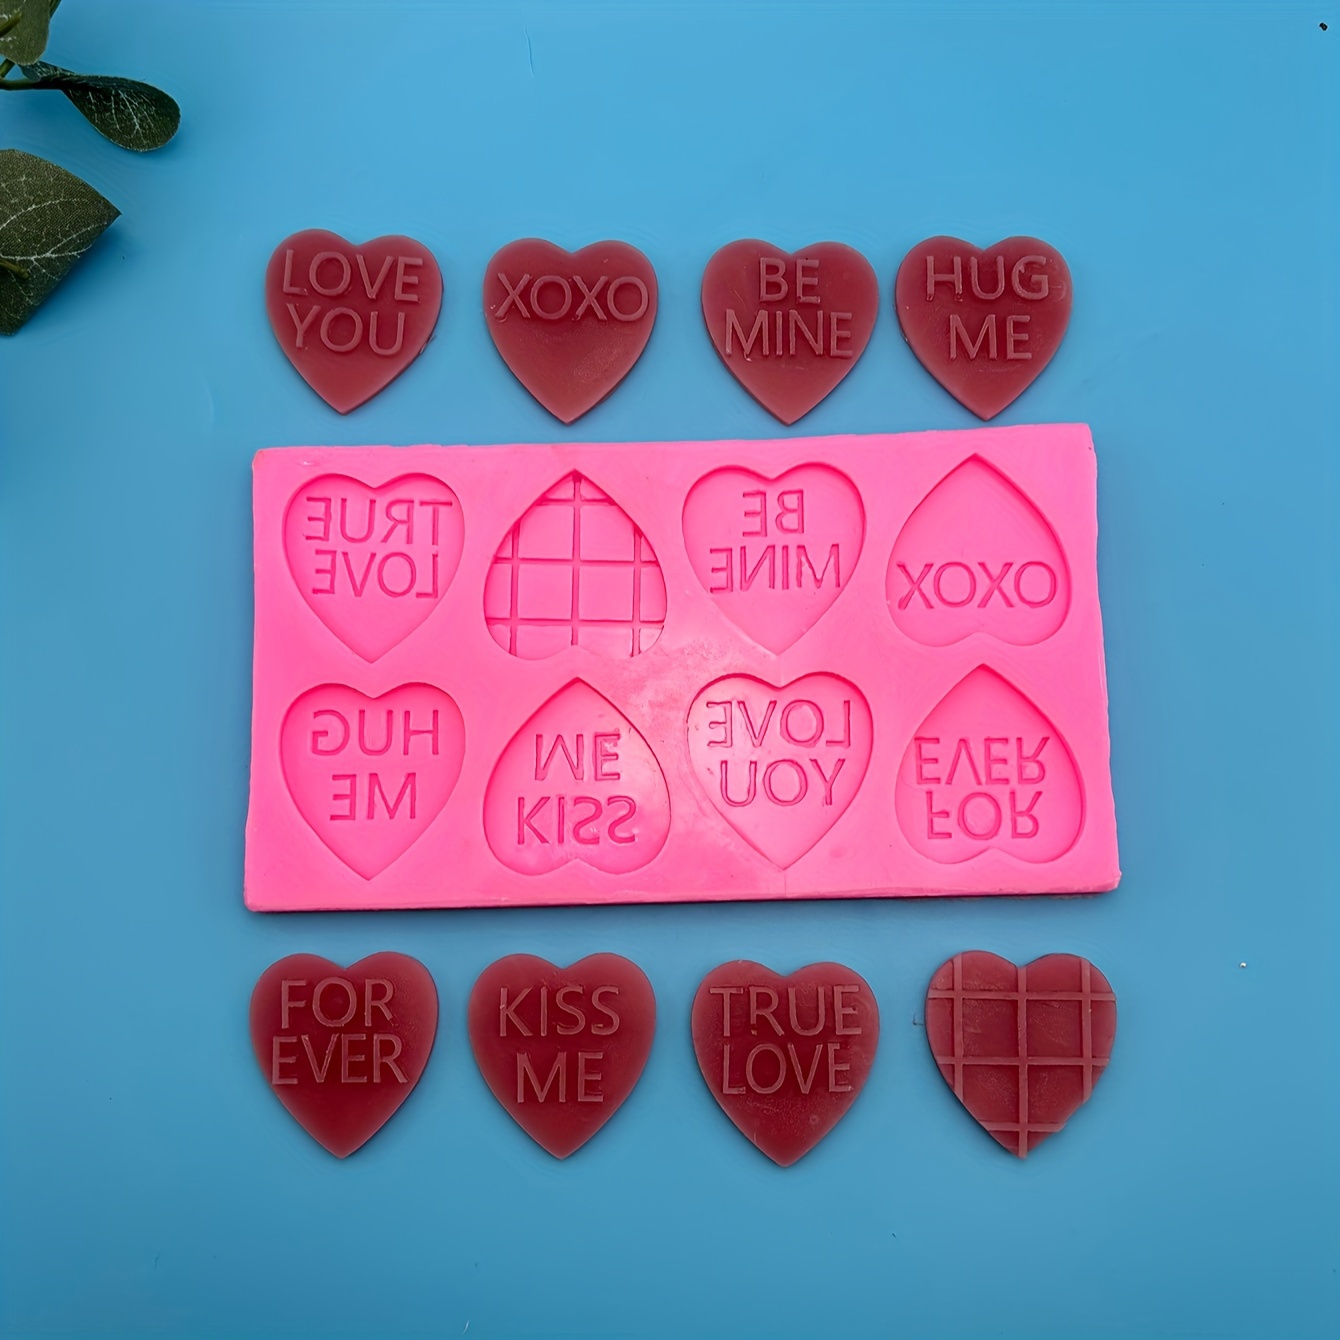 4 Pieces 10 Holes Heart Shaped Silicone Mold Valentine's Conversation Candy  Heart Mold Non-Stick Silicone Fondant Baking Mold Jelly Pudding Dessert